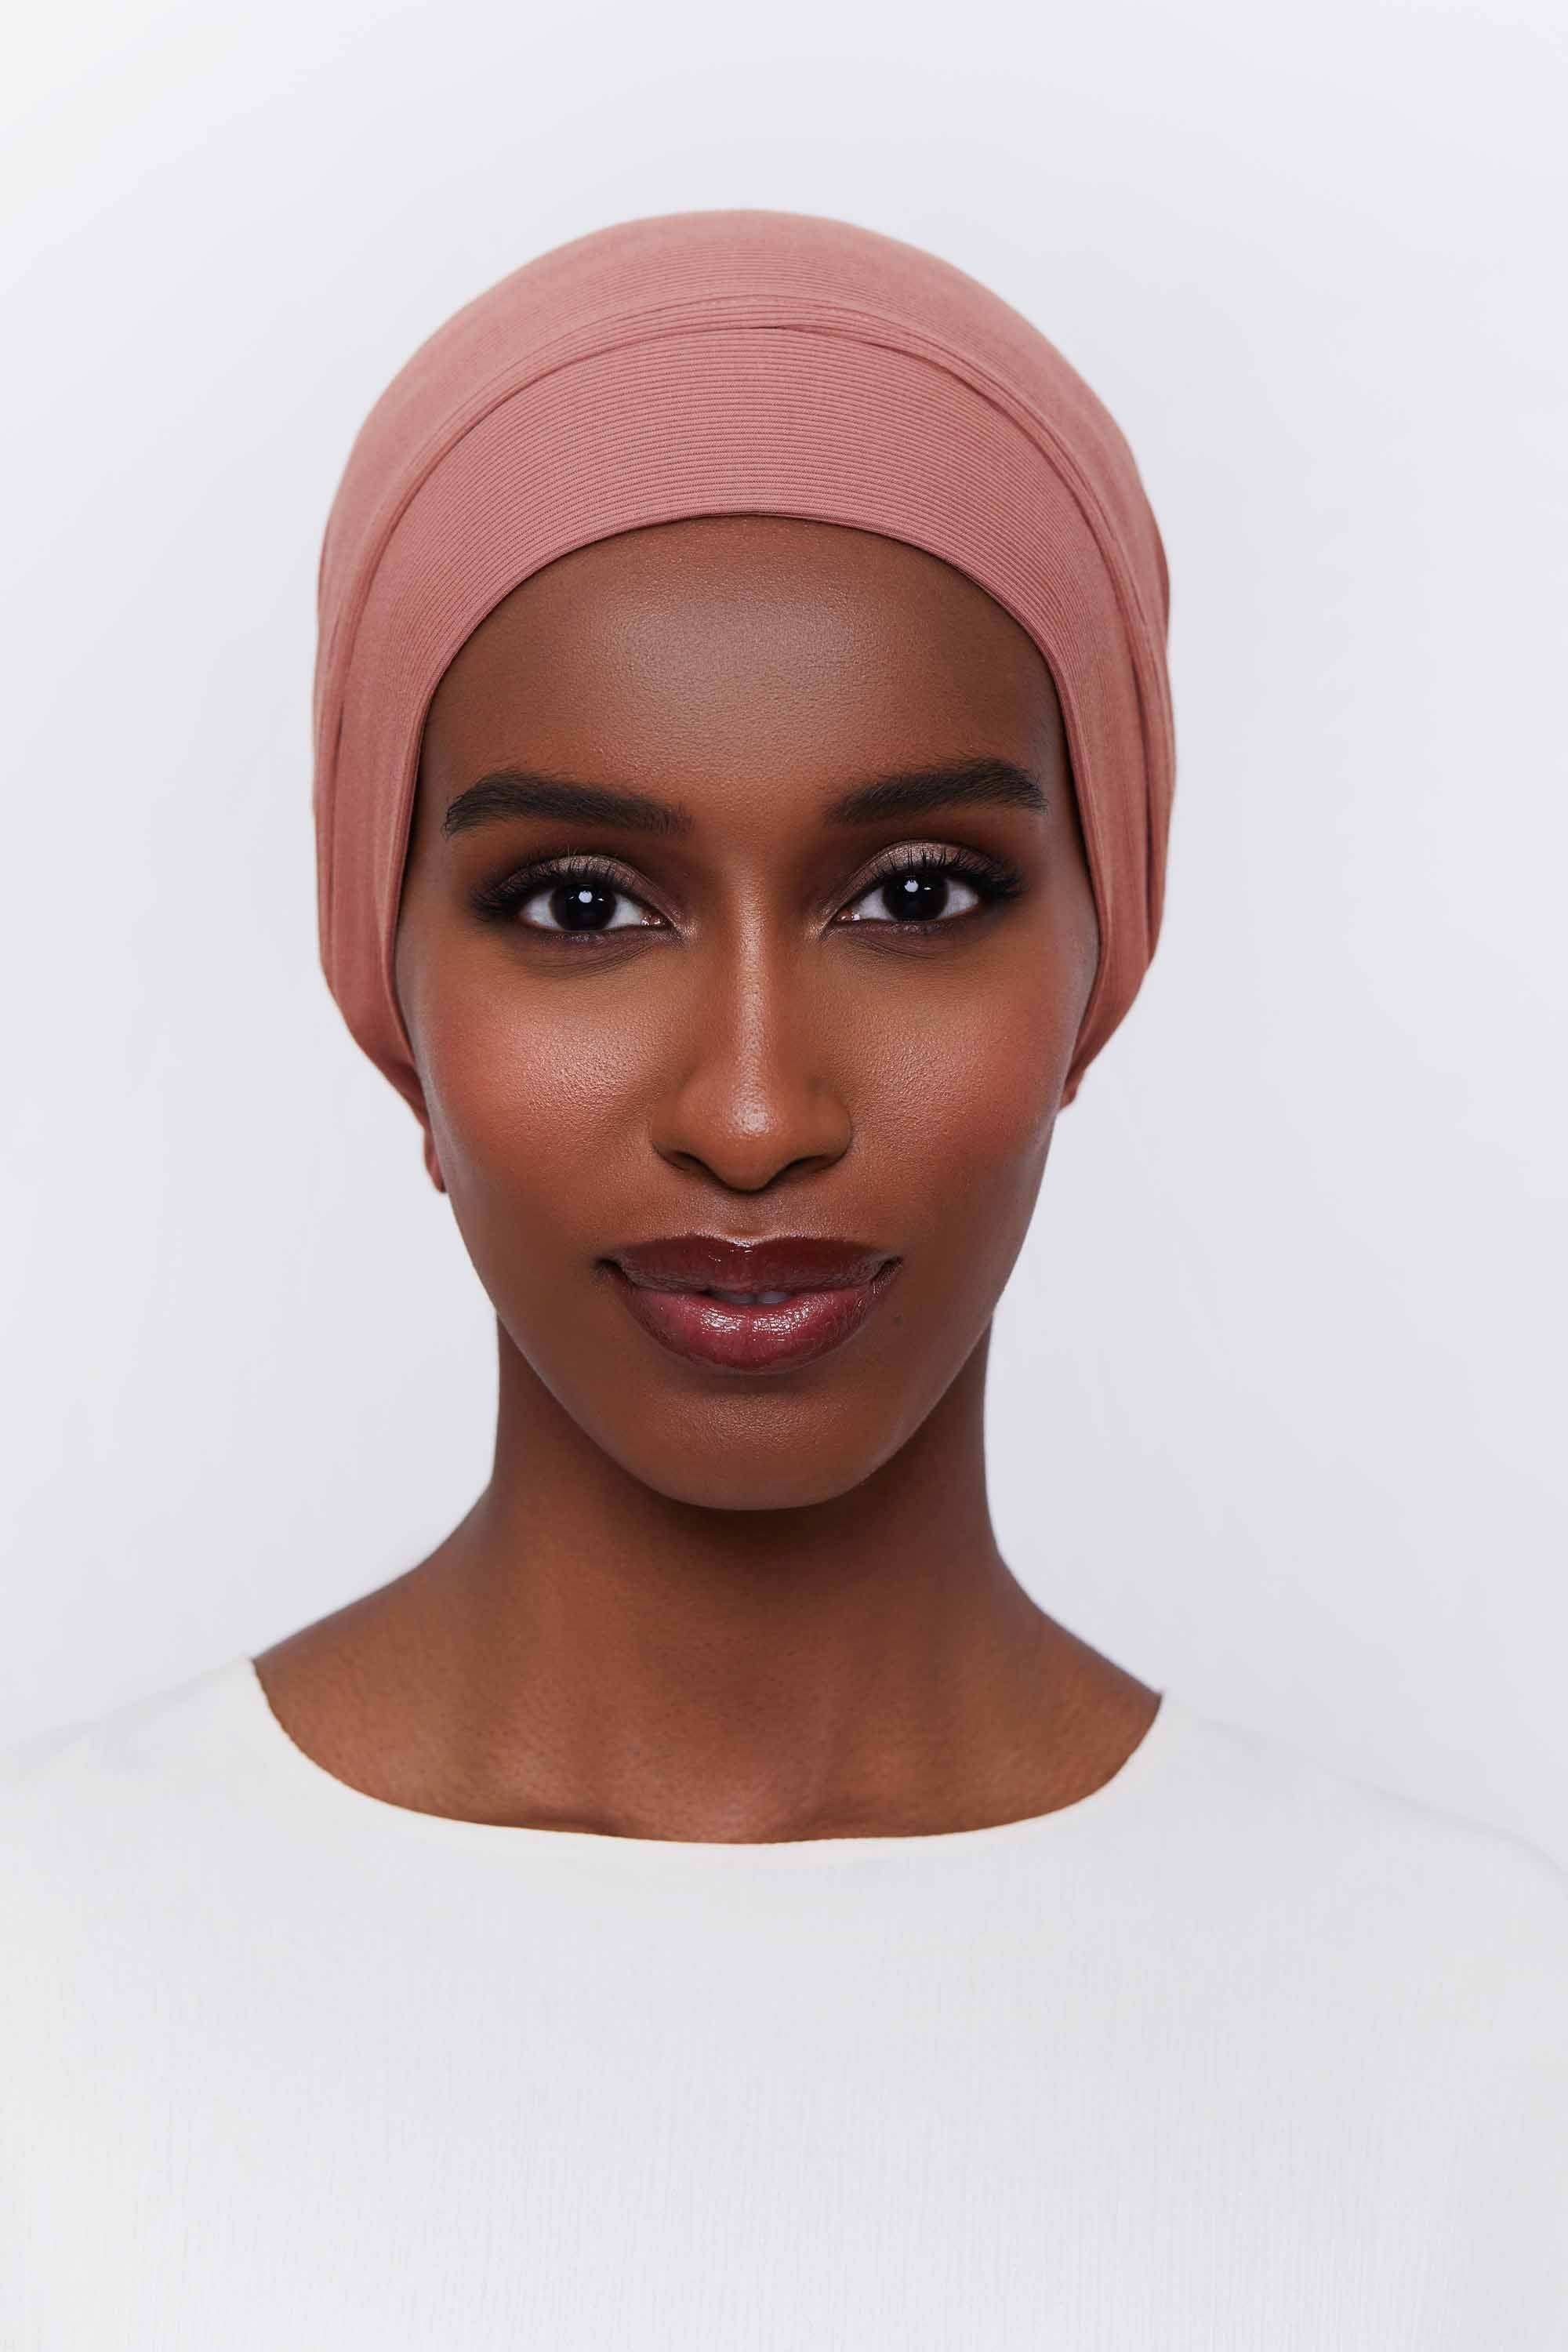 Ribbed Tie Back Undercap - Rose Brown Extra Small Accessories Veiled 